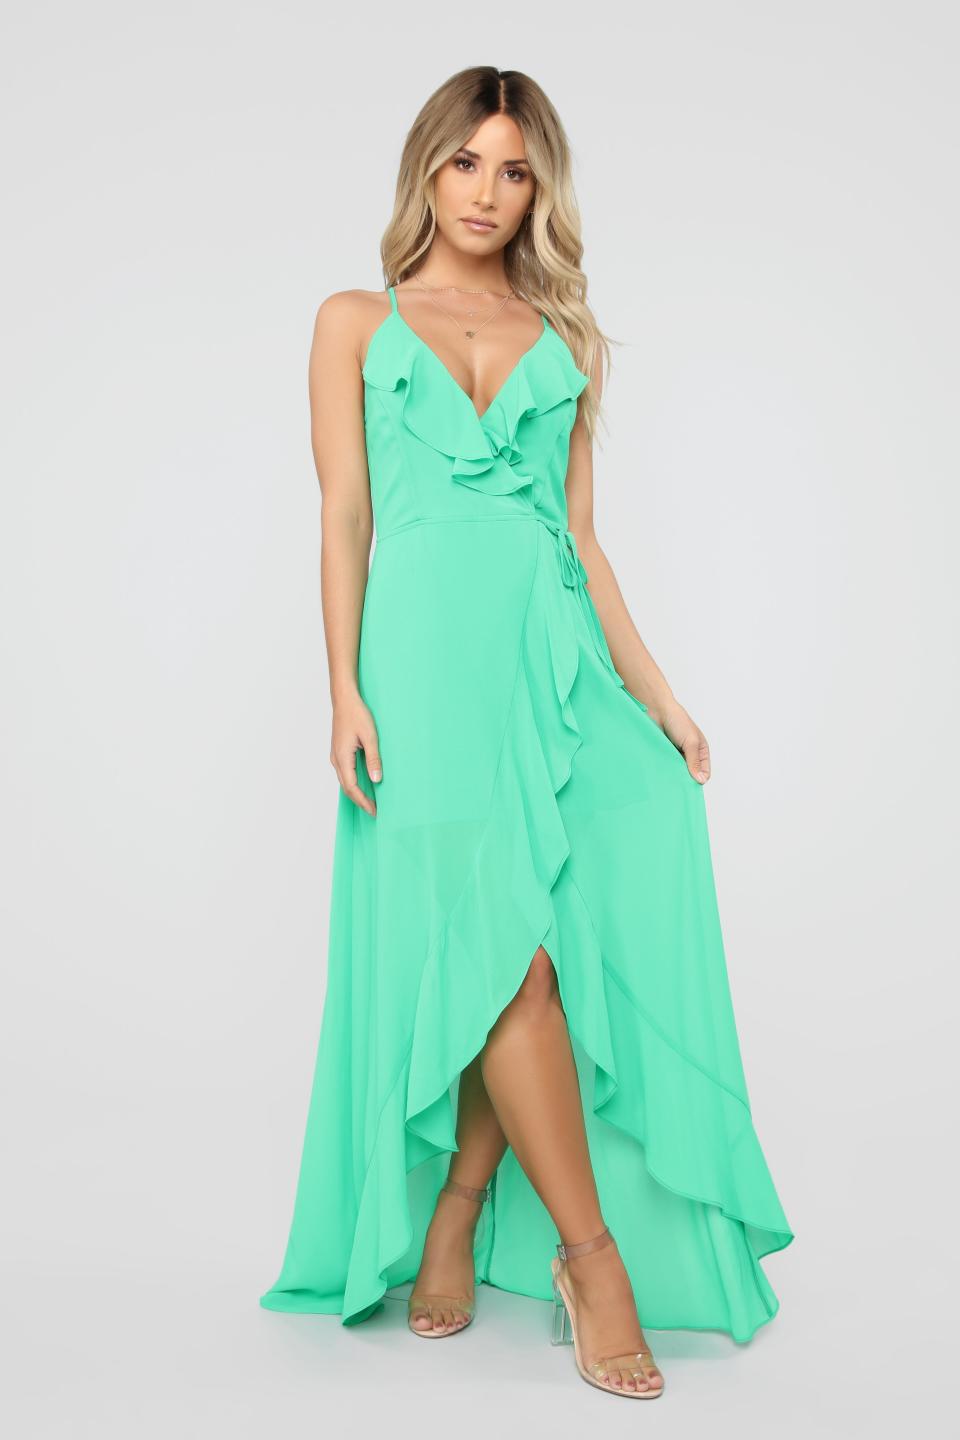 <strong><a href="https://www.fashionnova.com/products/clear-my-schedule-chiffon-maxi-dress-hot-pink" target="_blank" rel="noopener noreferrer">Get the Fashion Nova chiffon maxi dress in green for $39.99.</a></strong>